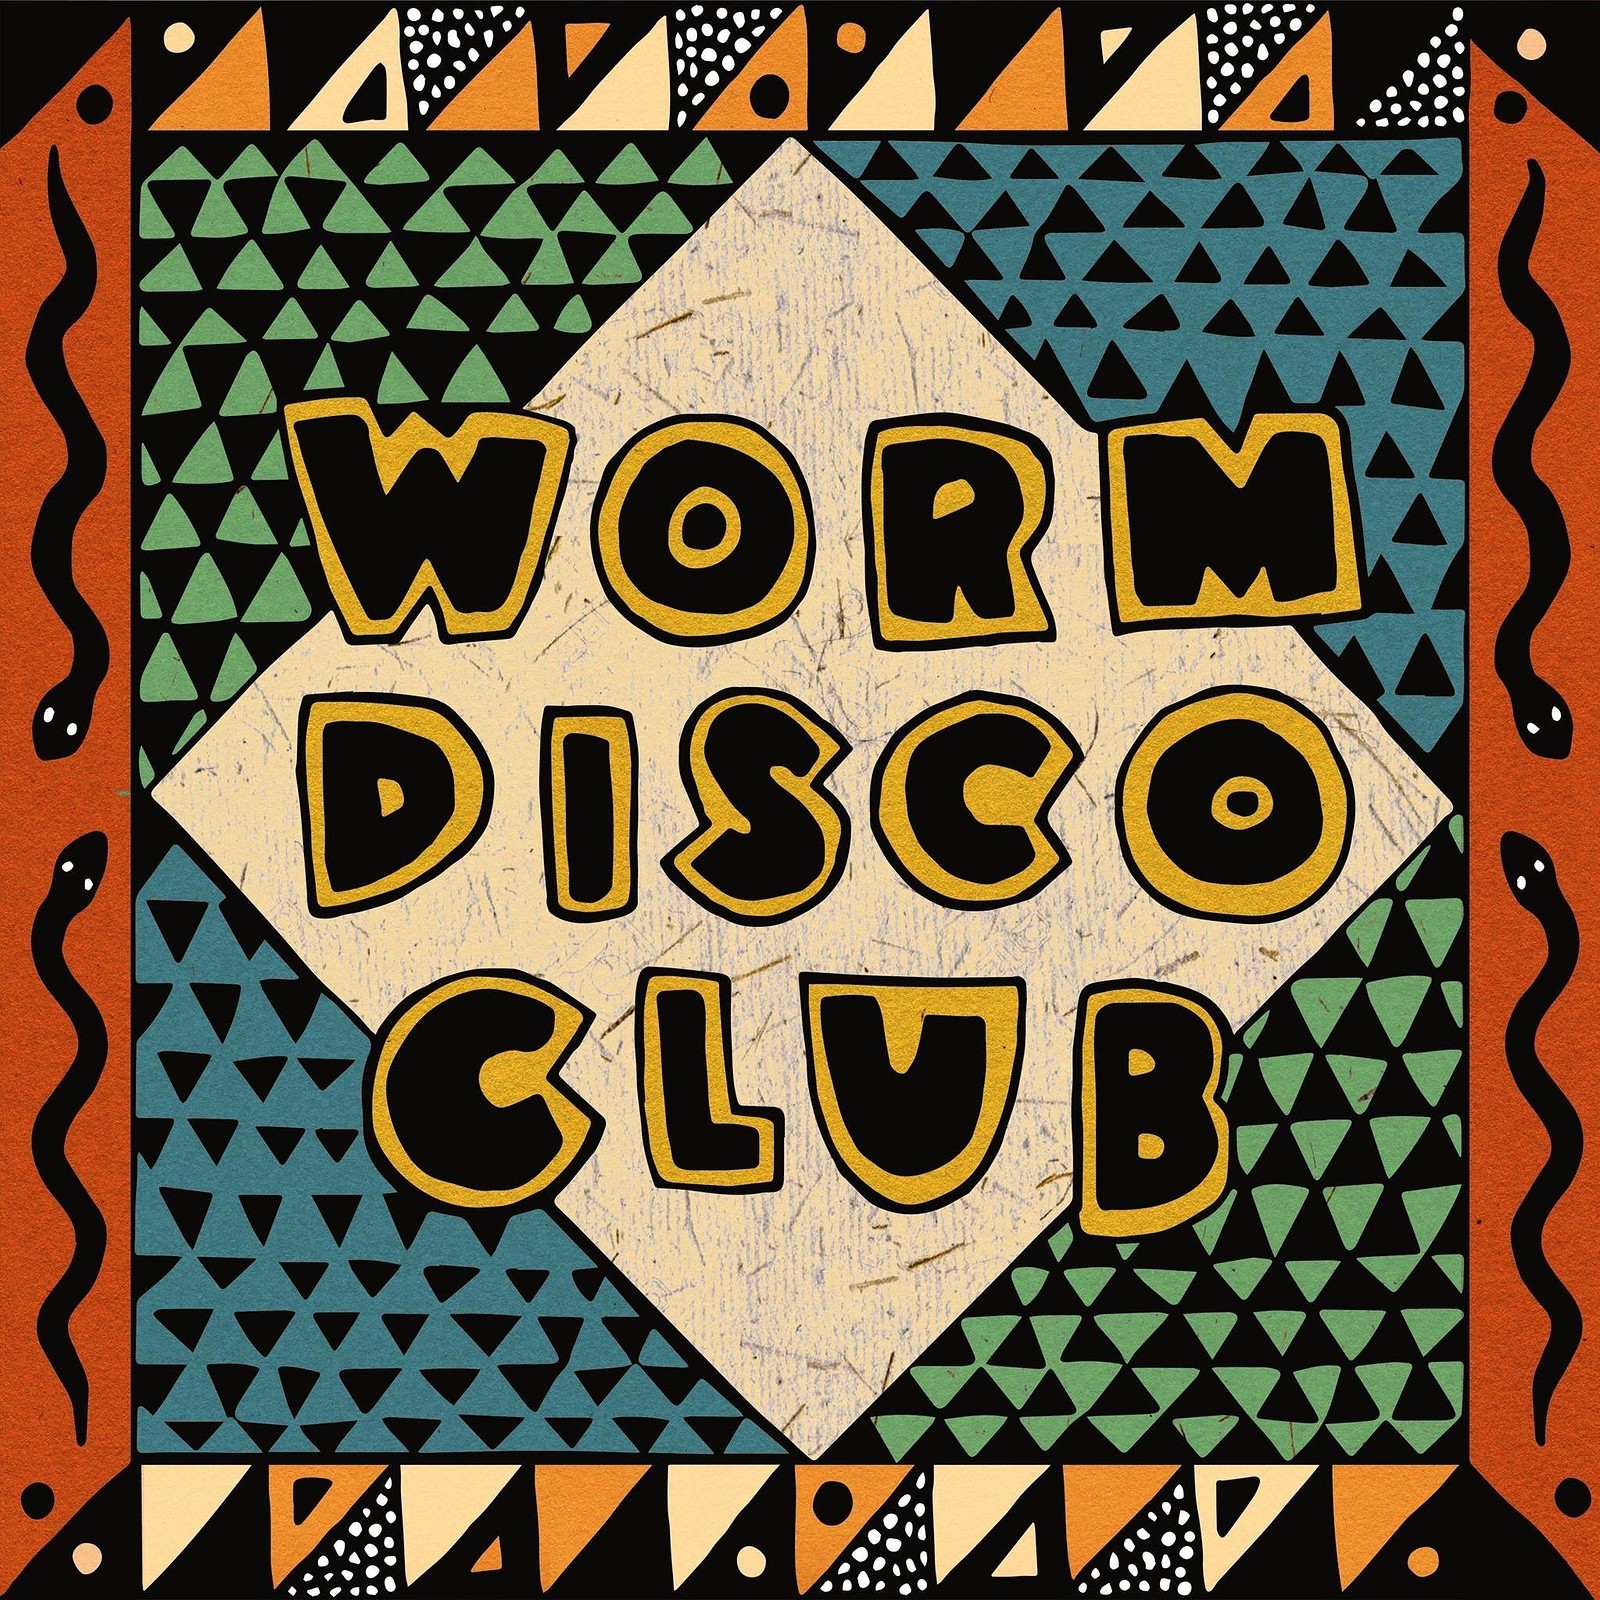 Dial Africa Vs Worm Disco Club at Crofters Rights